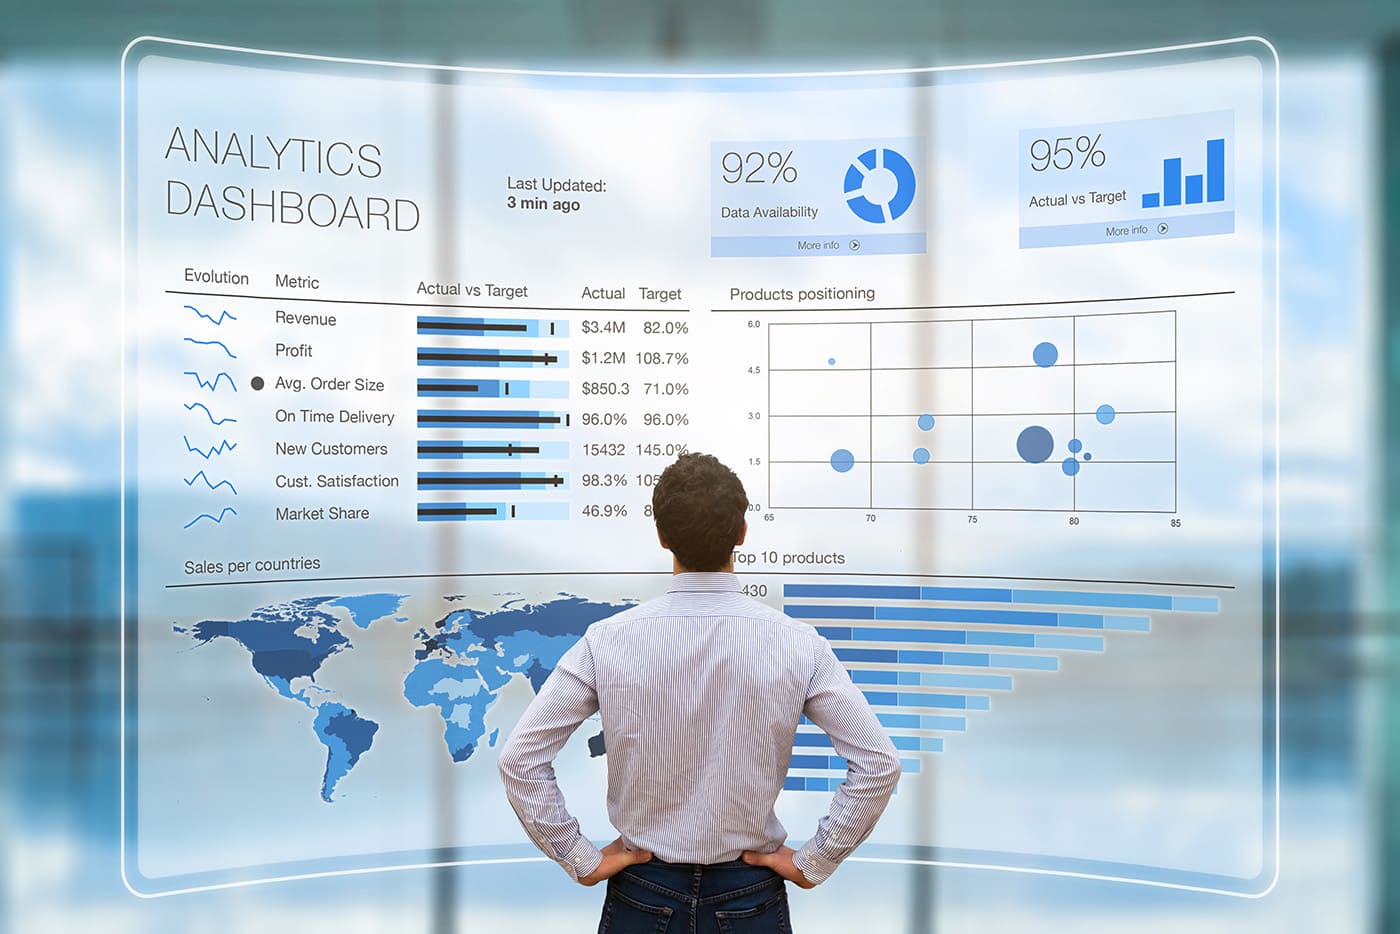 Beyond Dashboards: The Future Of Analytics And Business Intelligence? | Bernard Marr